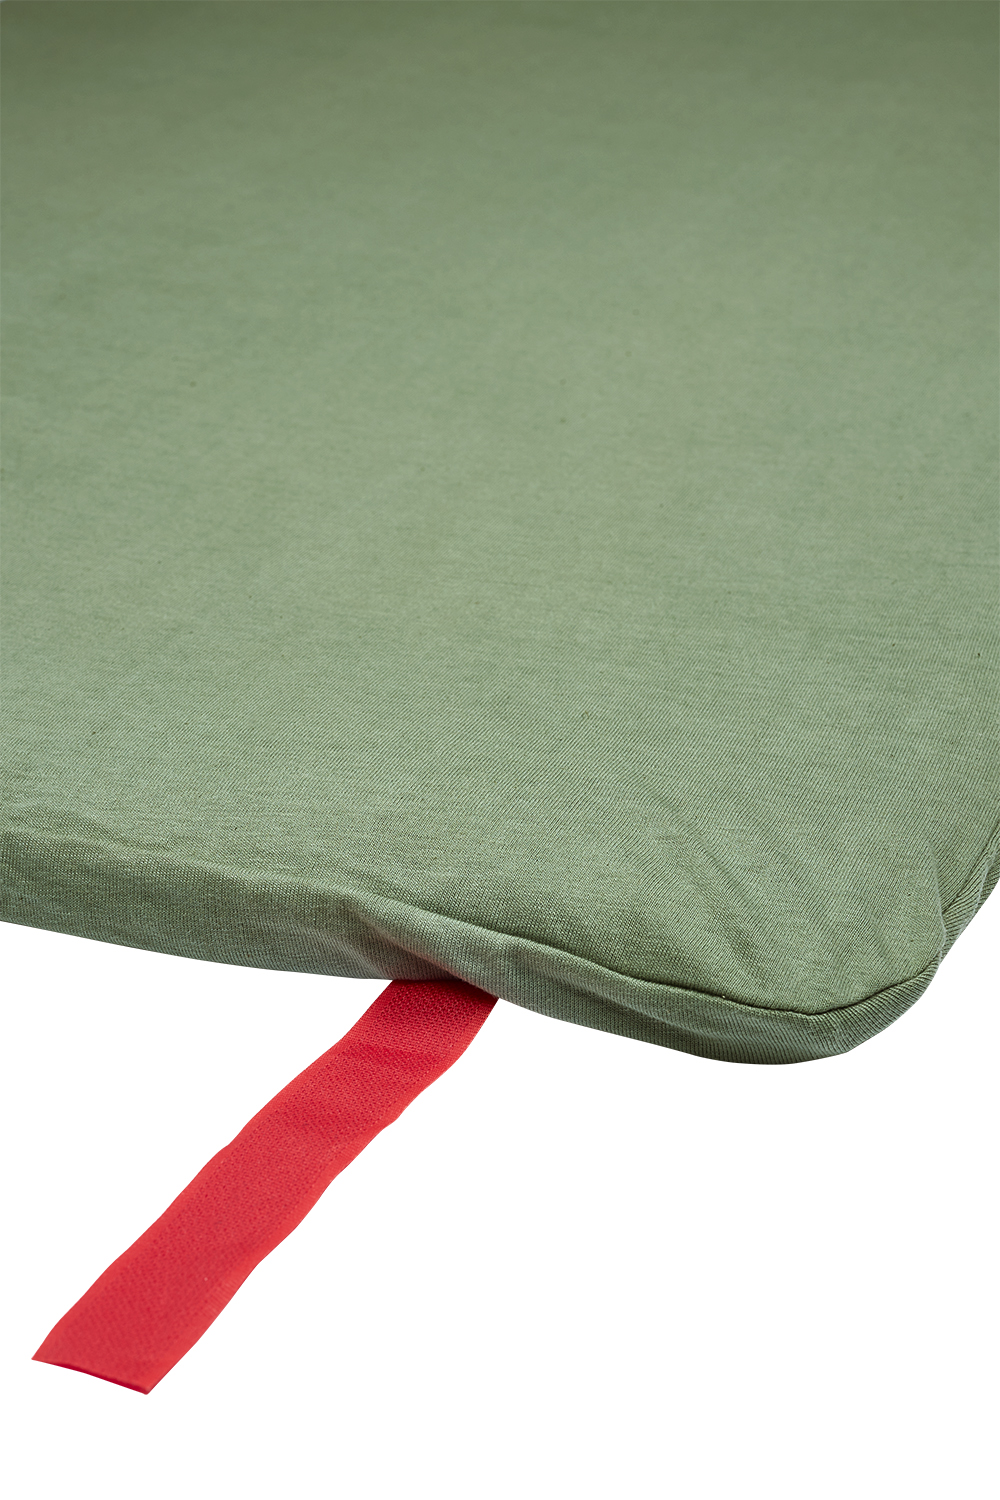 Campingbed matrashoes Uni - forest green - 60x120cm